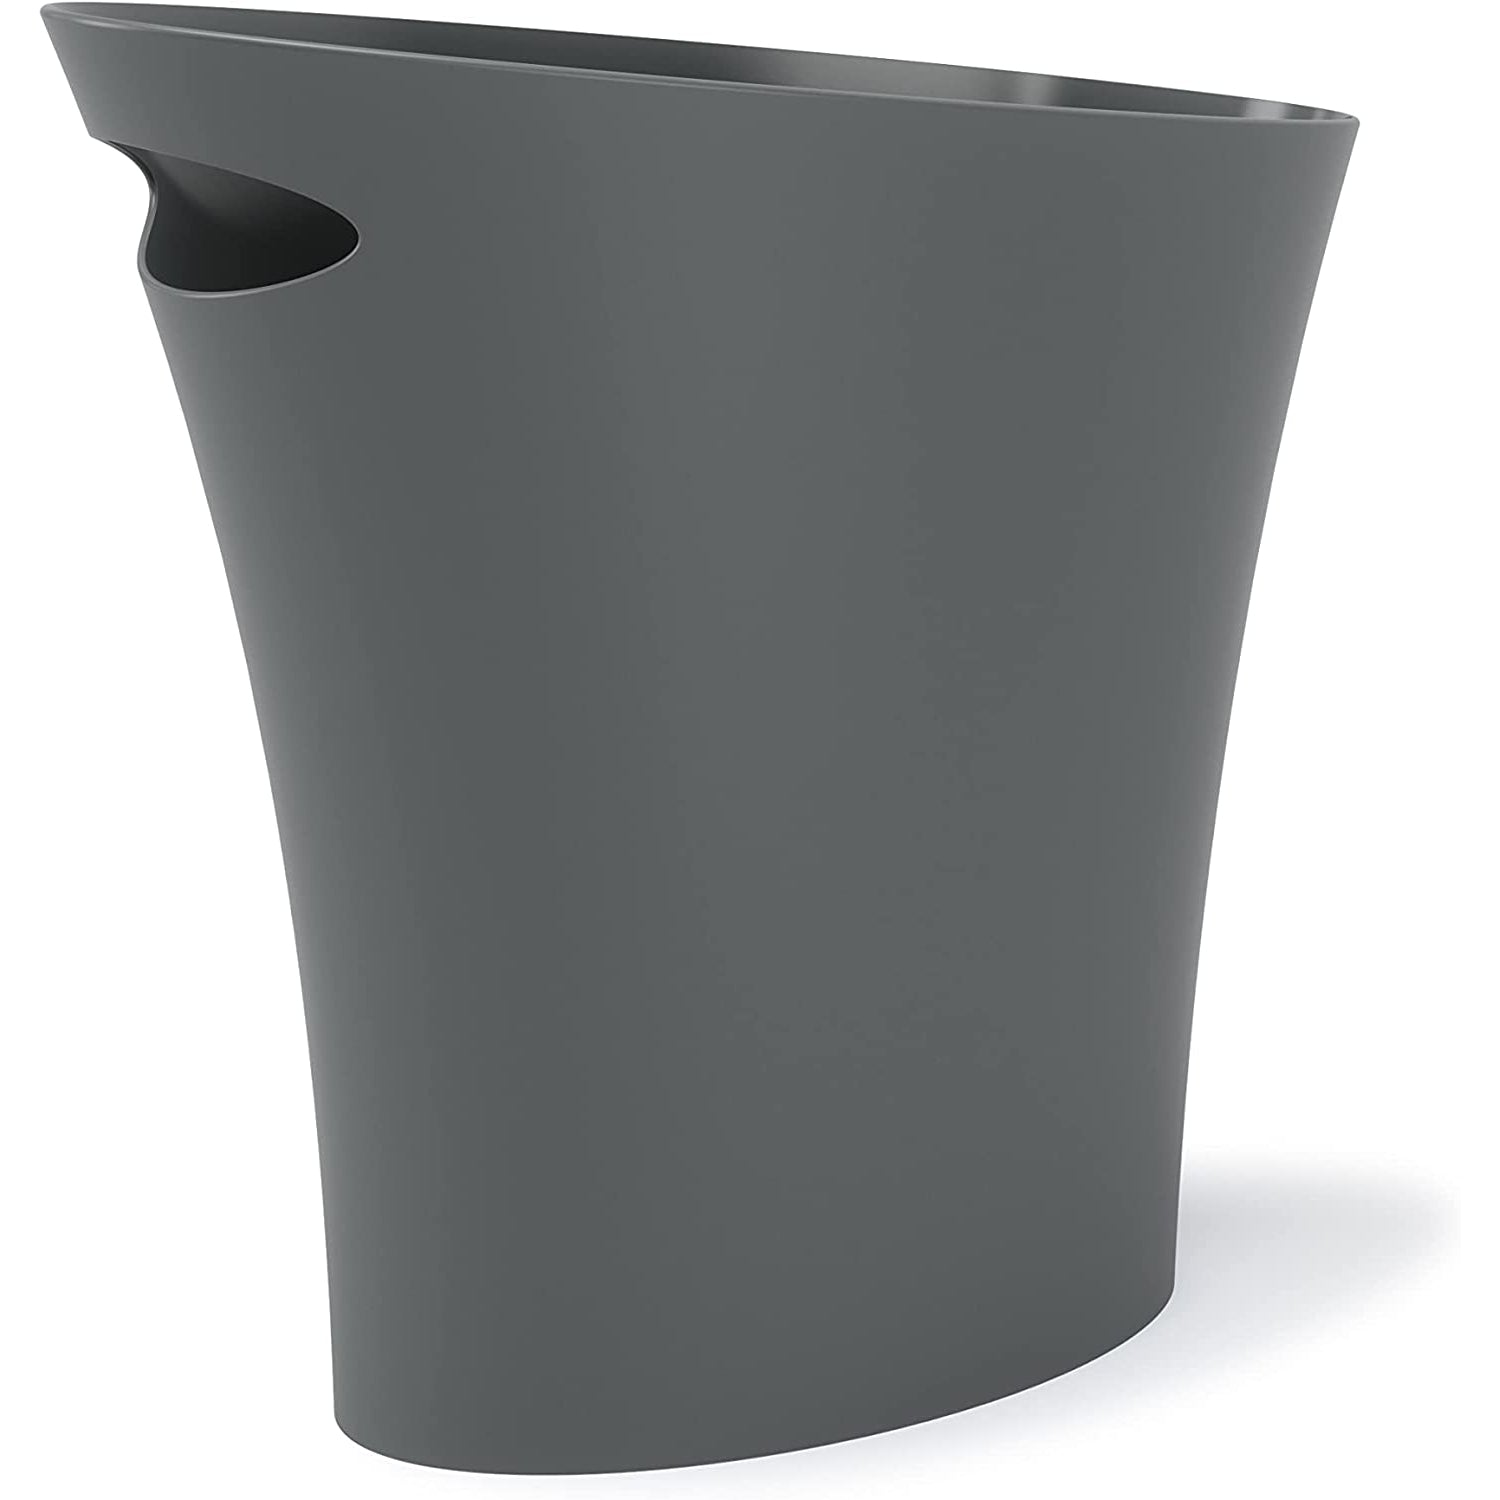 Small Trash Can – Open Top Skinny Garbage Cans for Kitchen, Office, Dorm, Bathroom, etc. – Slim Waste Can for Compact/Tight Spaces – The Perfect Bathroom Trash Can - 2 Gallon Trash Bin - Grey